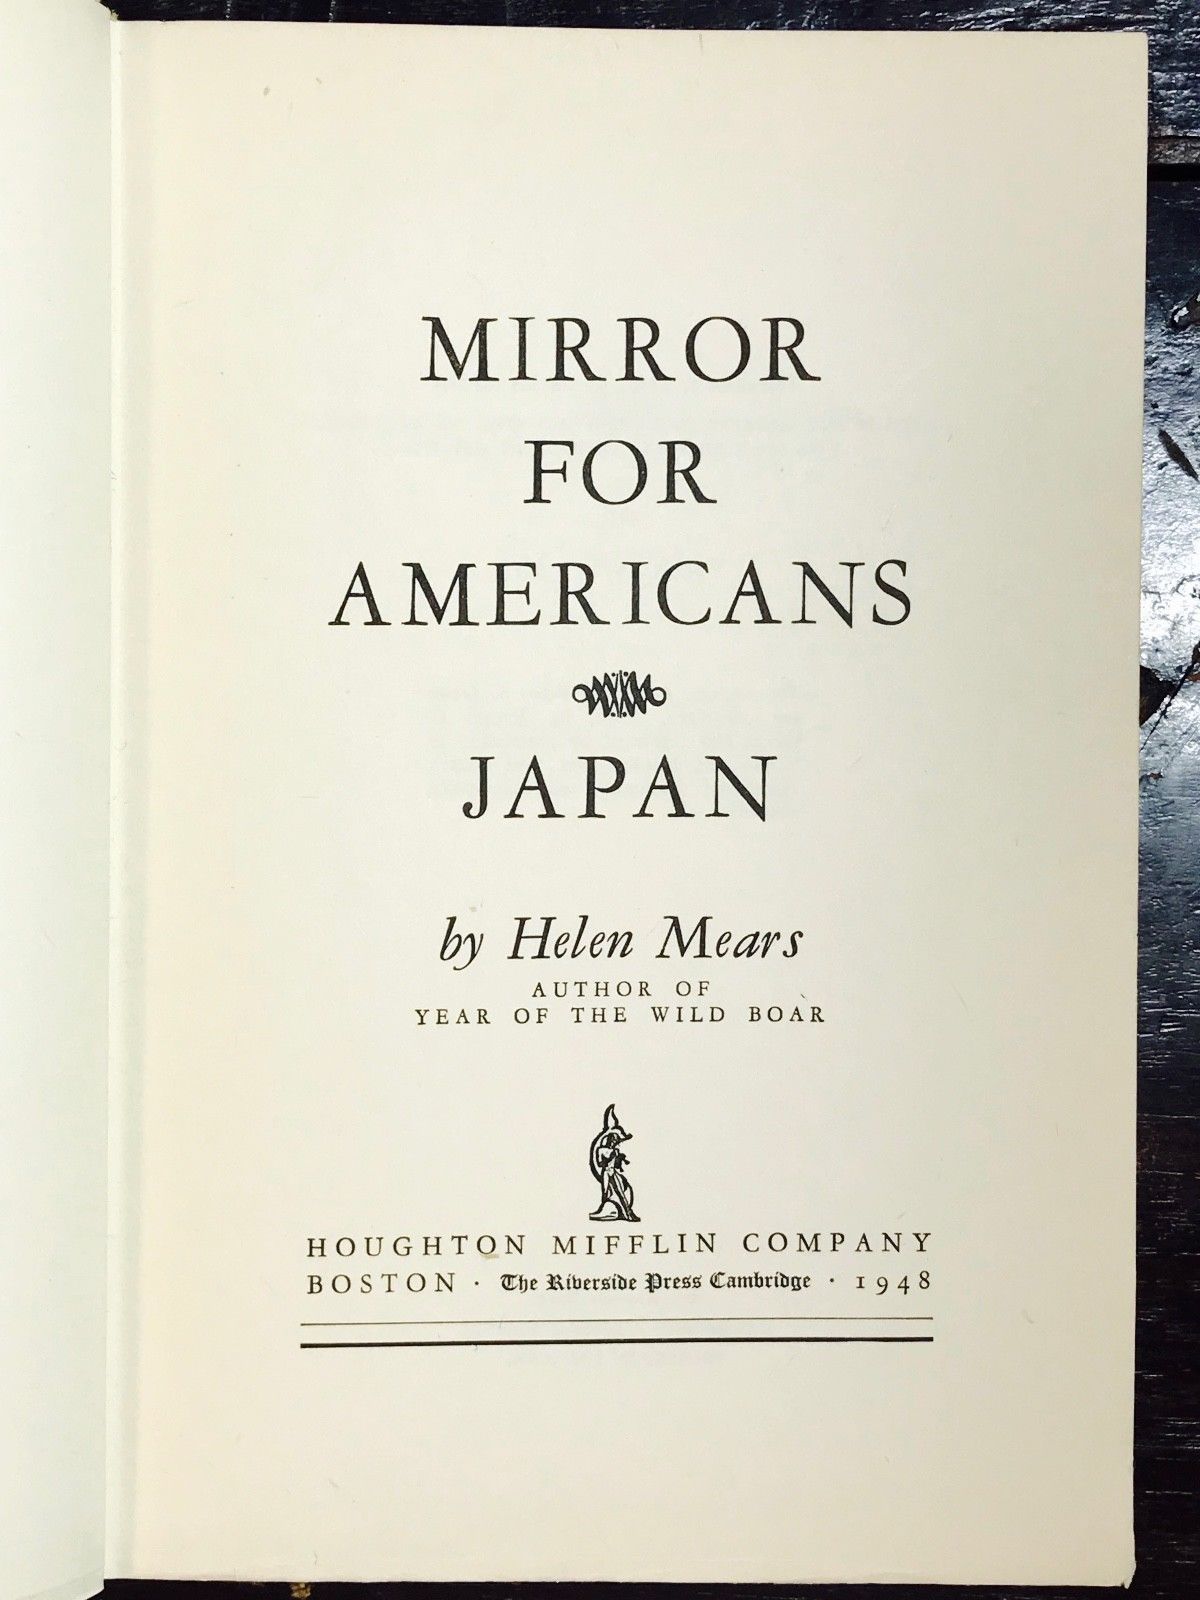 SIGNED REVIEW COPY, HELEN MEARS - MIRROR FOR AMERICANS 1st